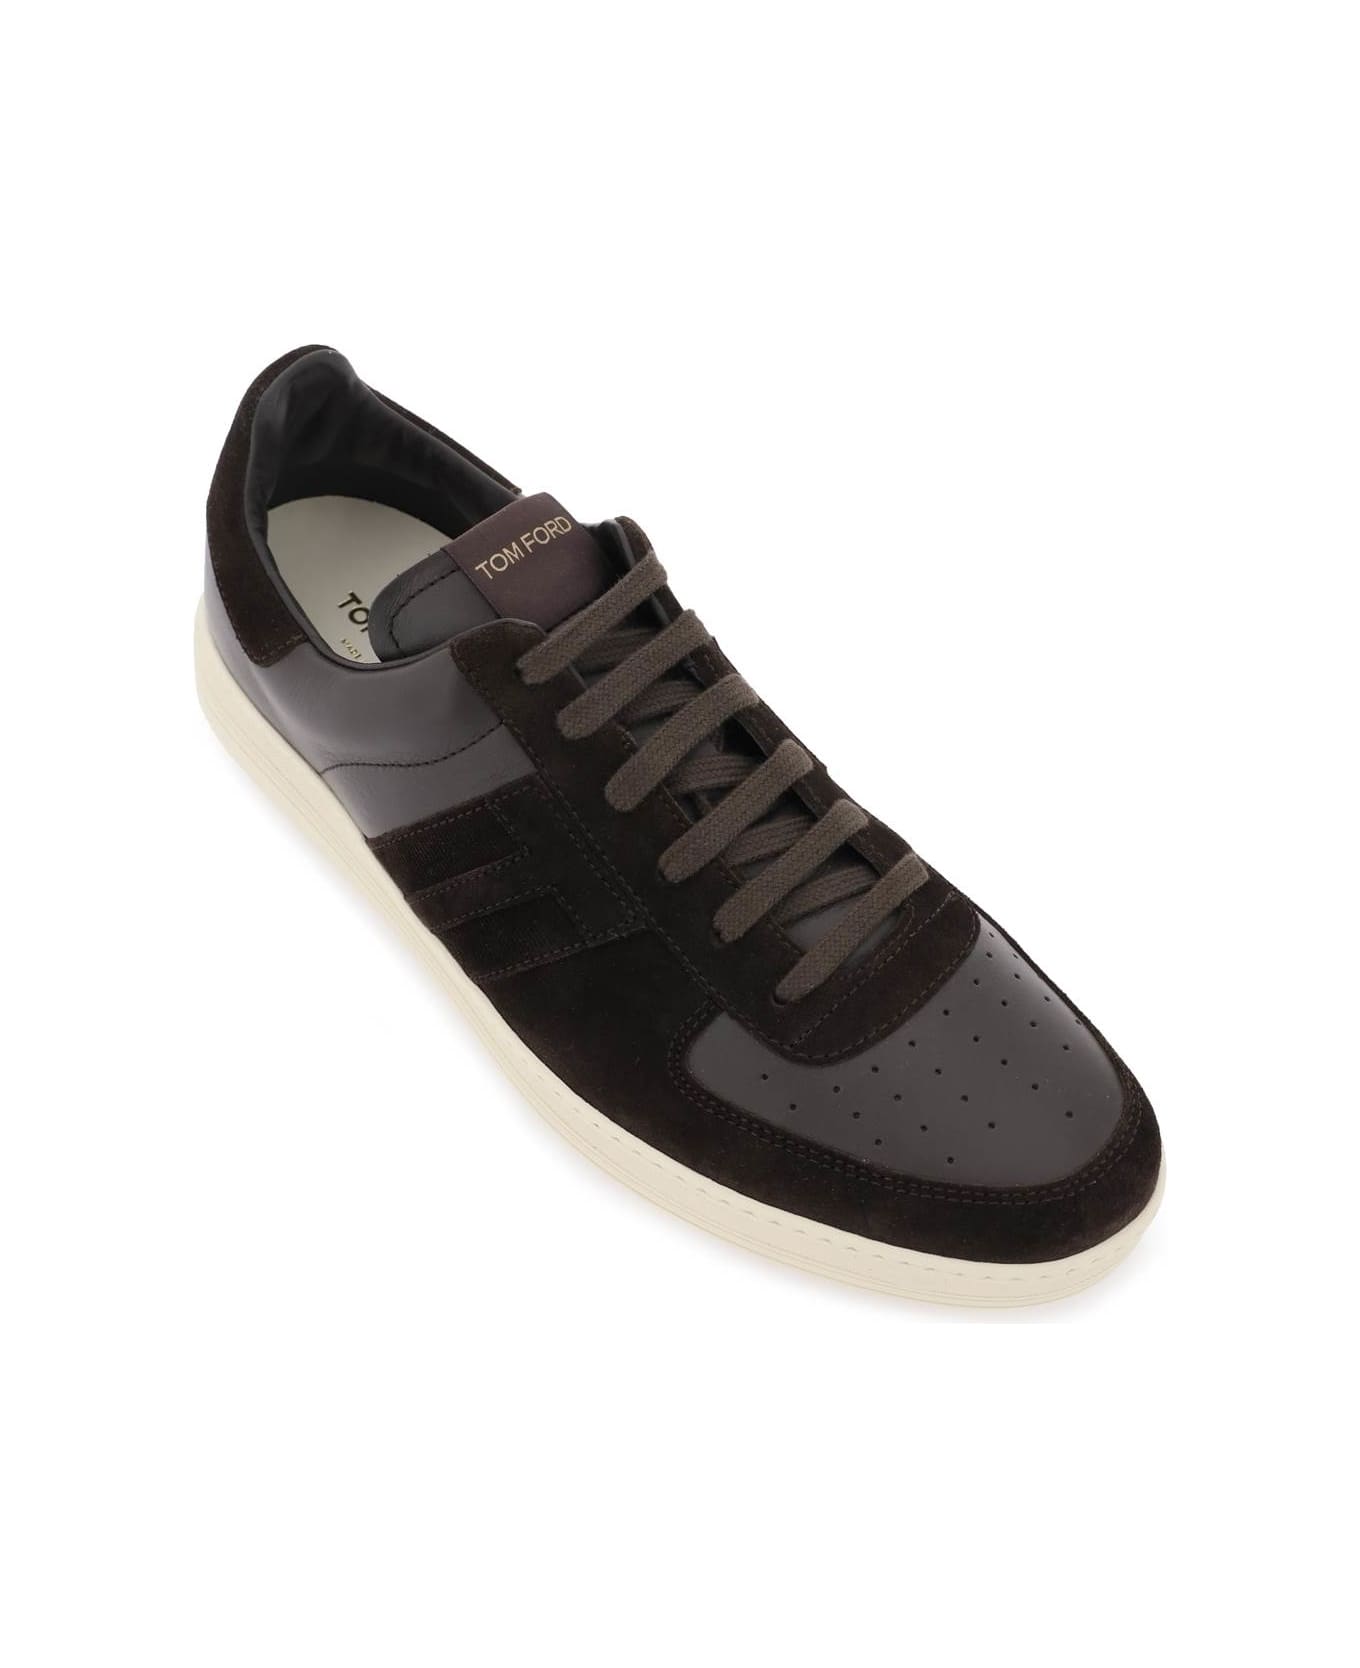 Tom Ford Suede And Leather 'radcliffe' Sneakers - BROWN CREAM (Brown)